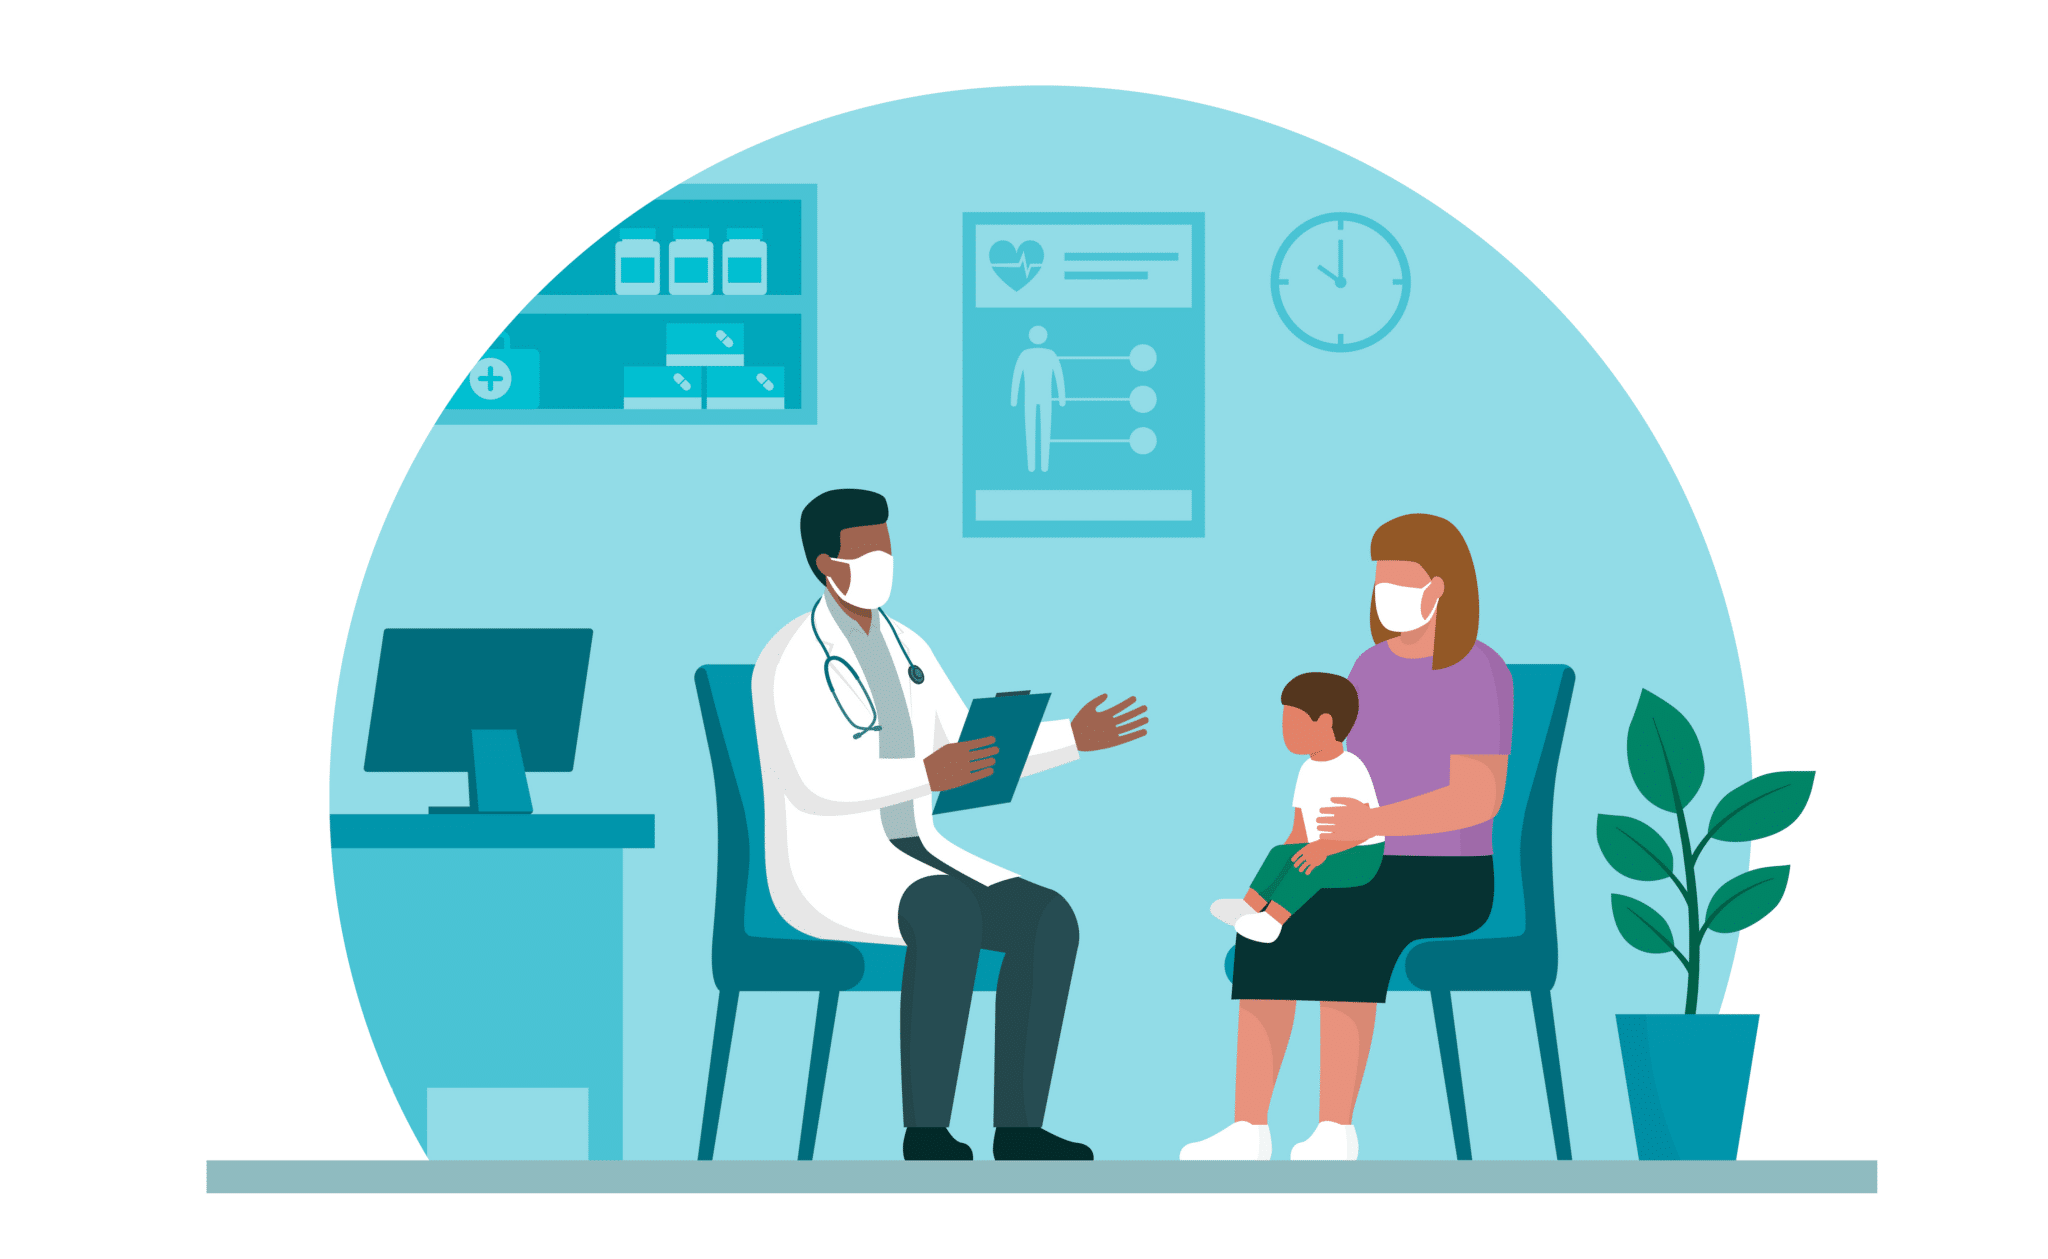 Illustration shows a woman with a child on her lap consulting with a doctor